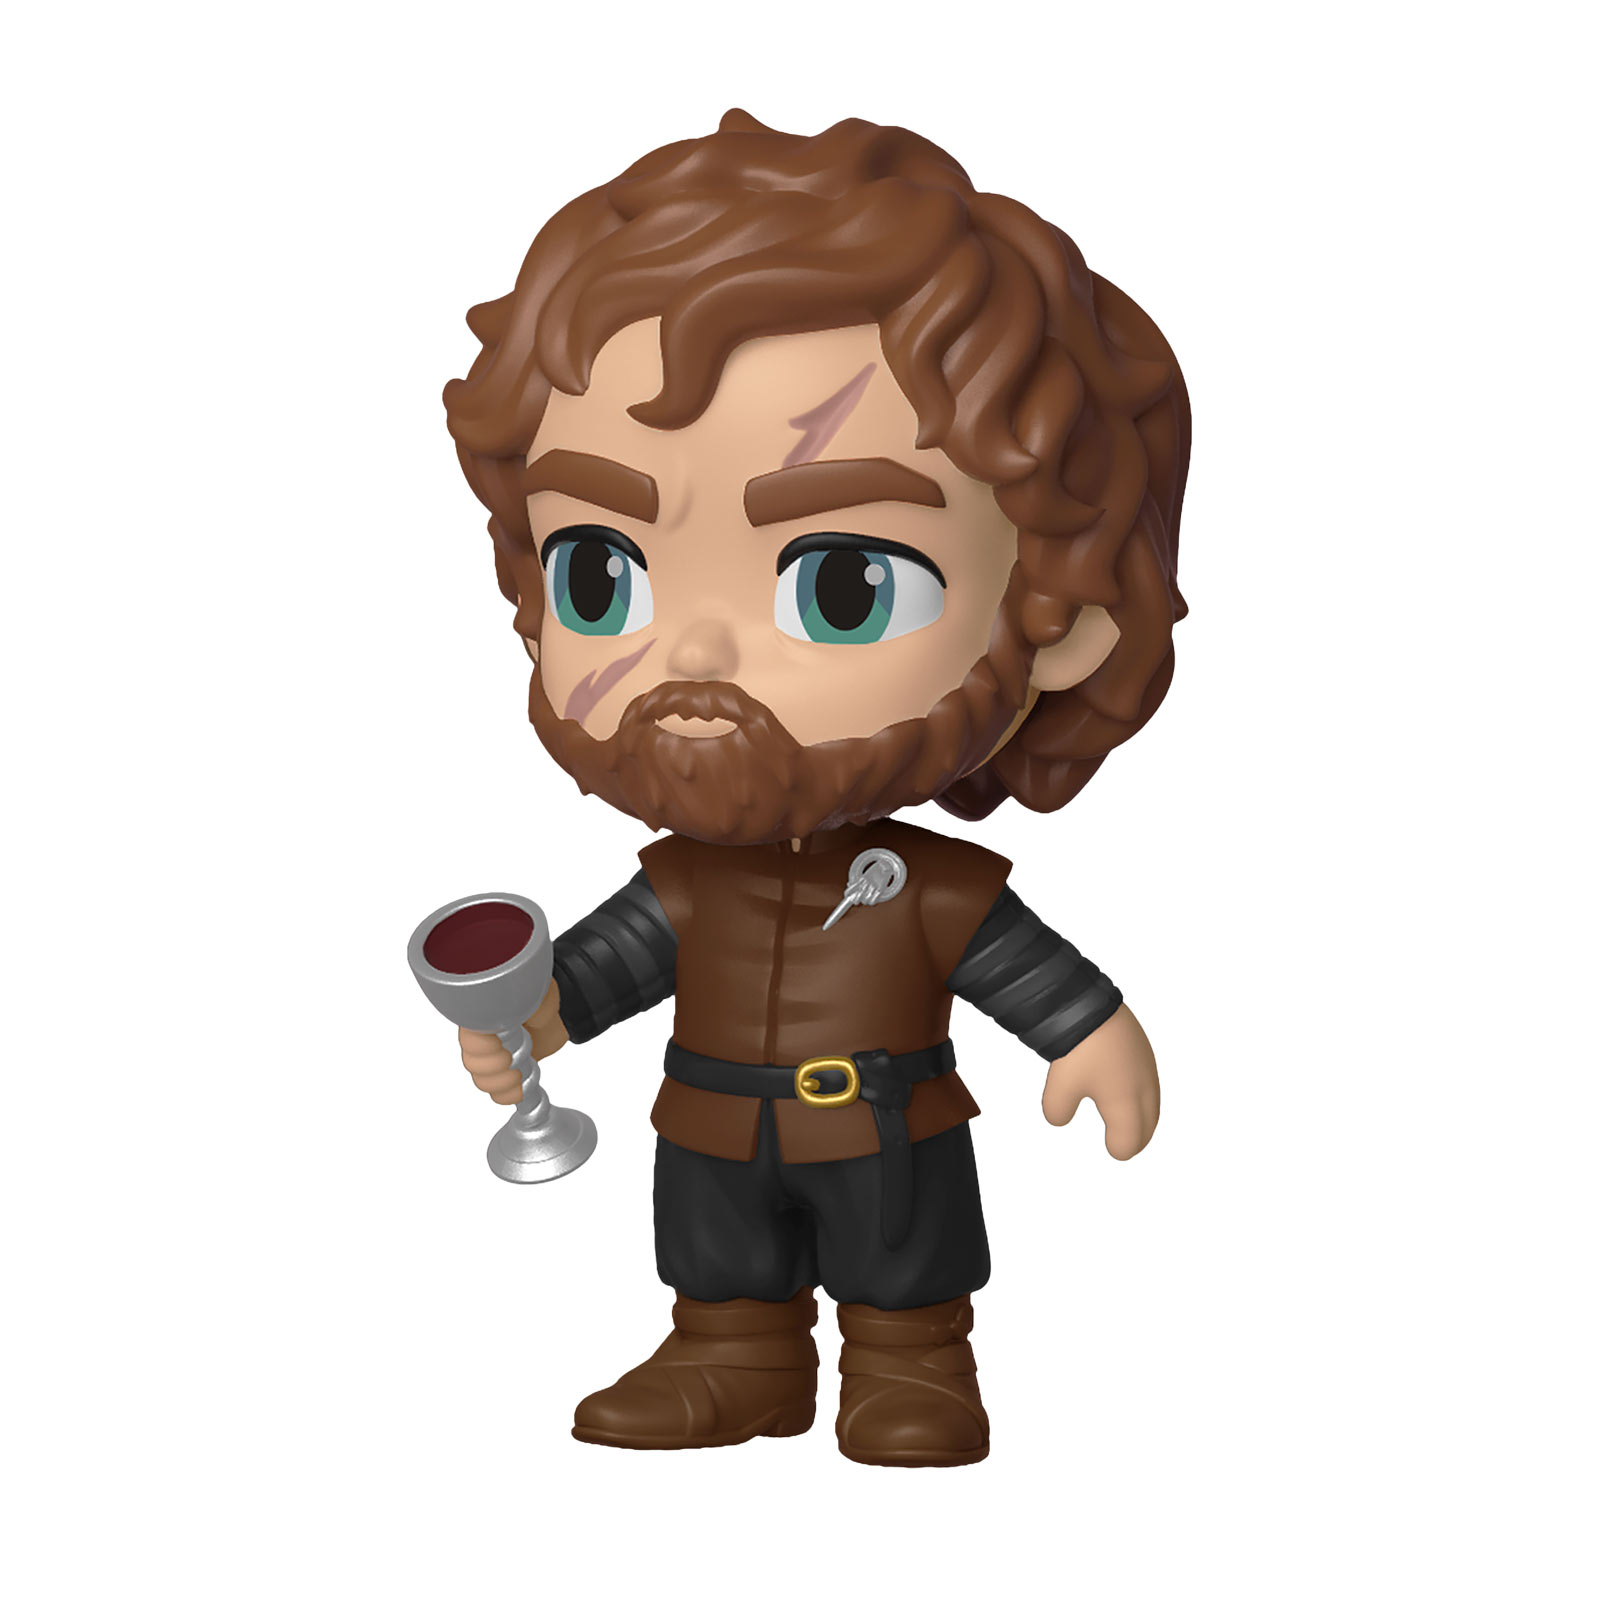 Game of Thrones - Tyrion Lannister Figurine Funko Five Star